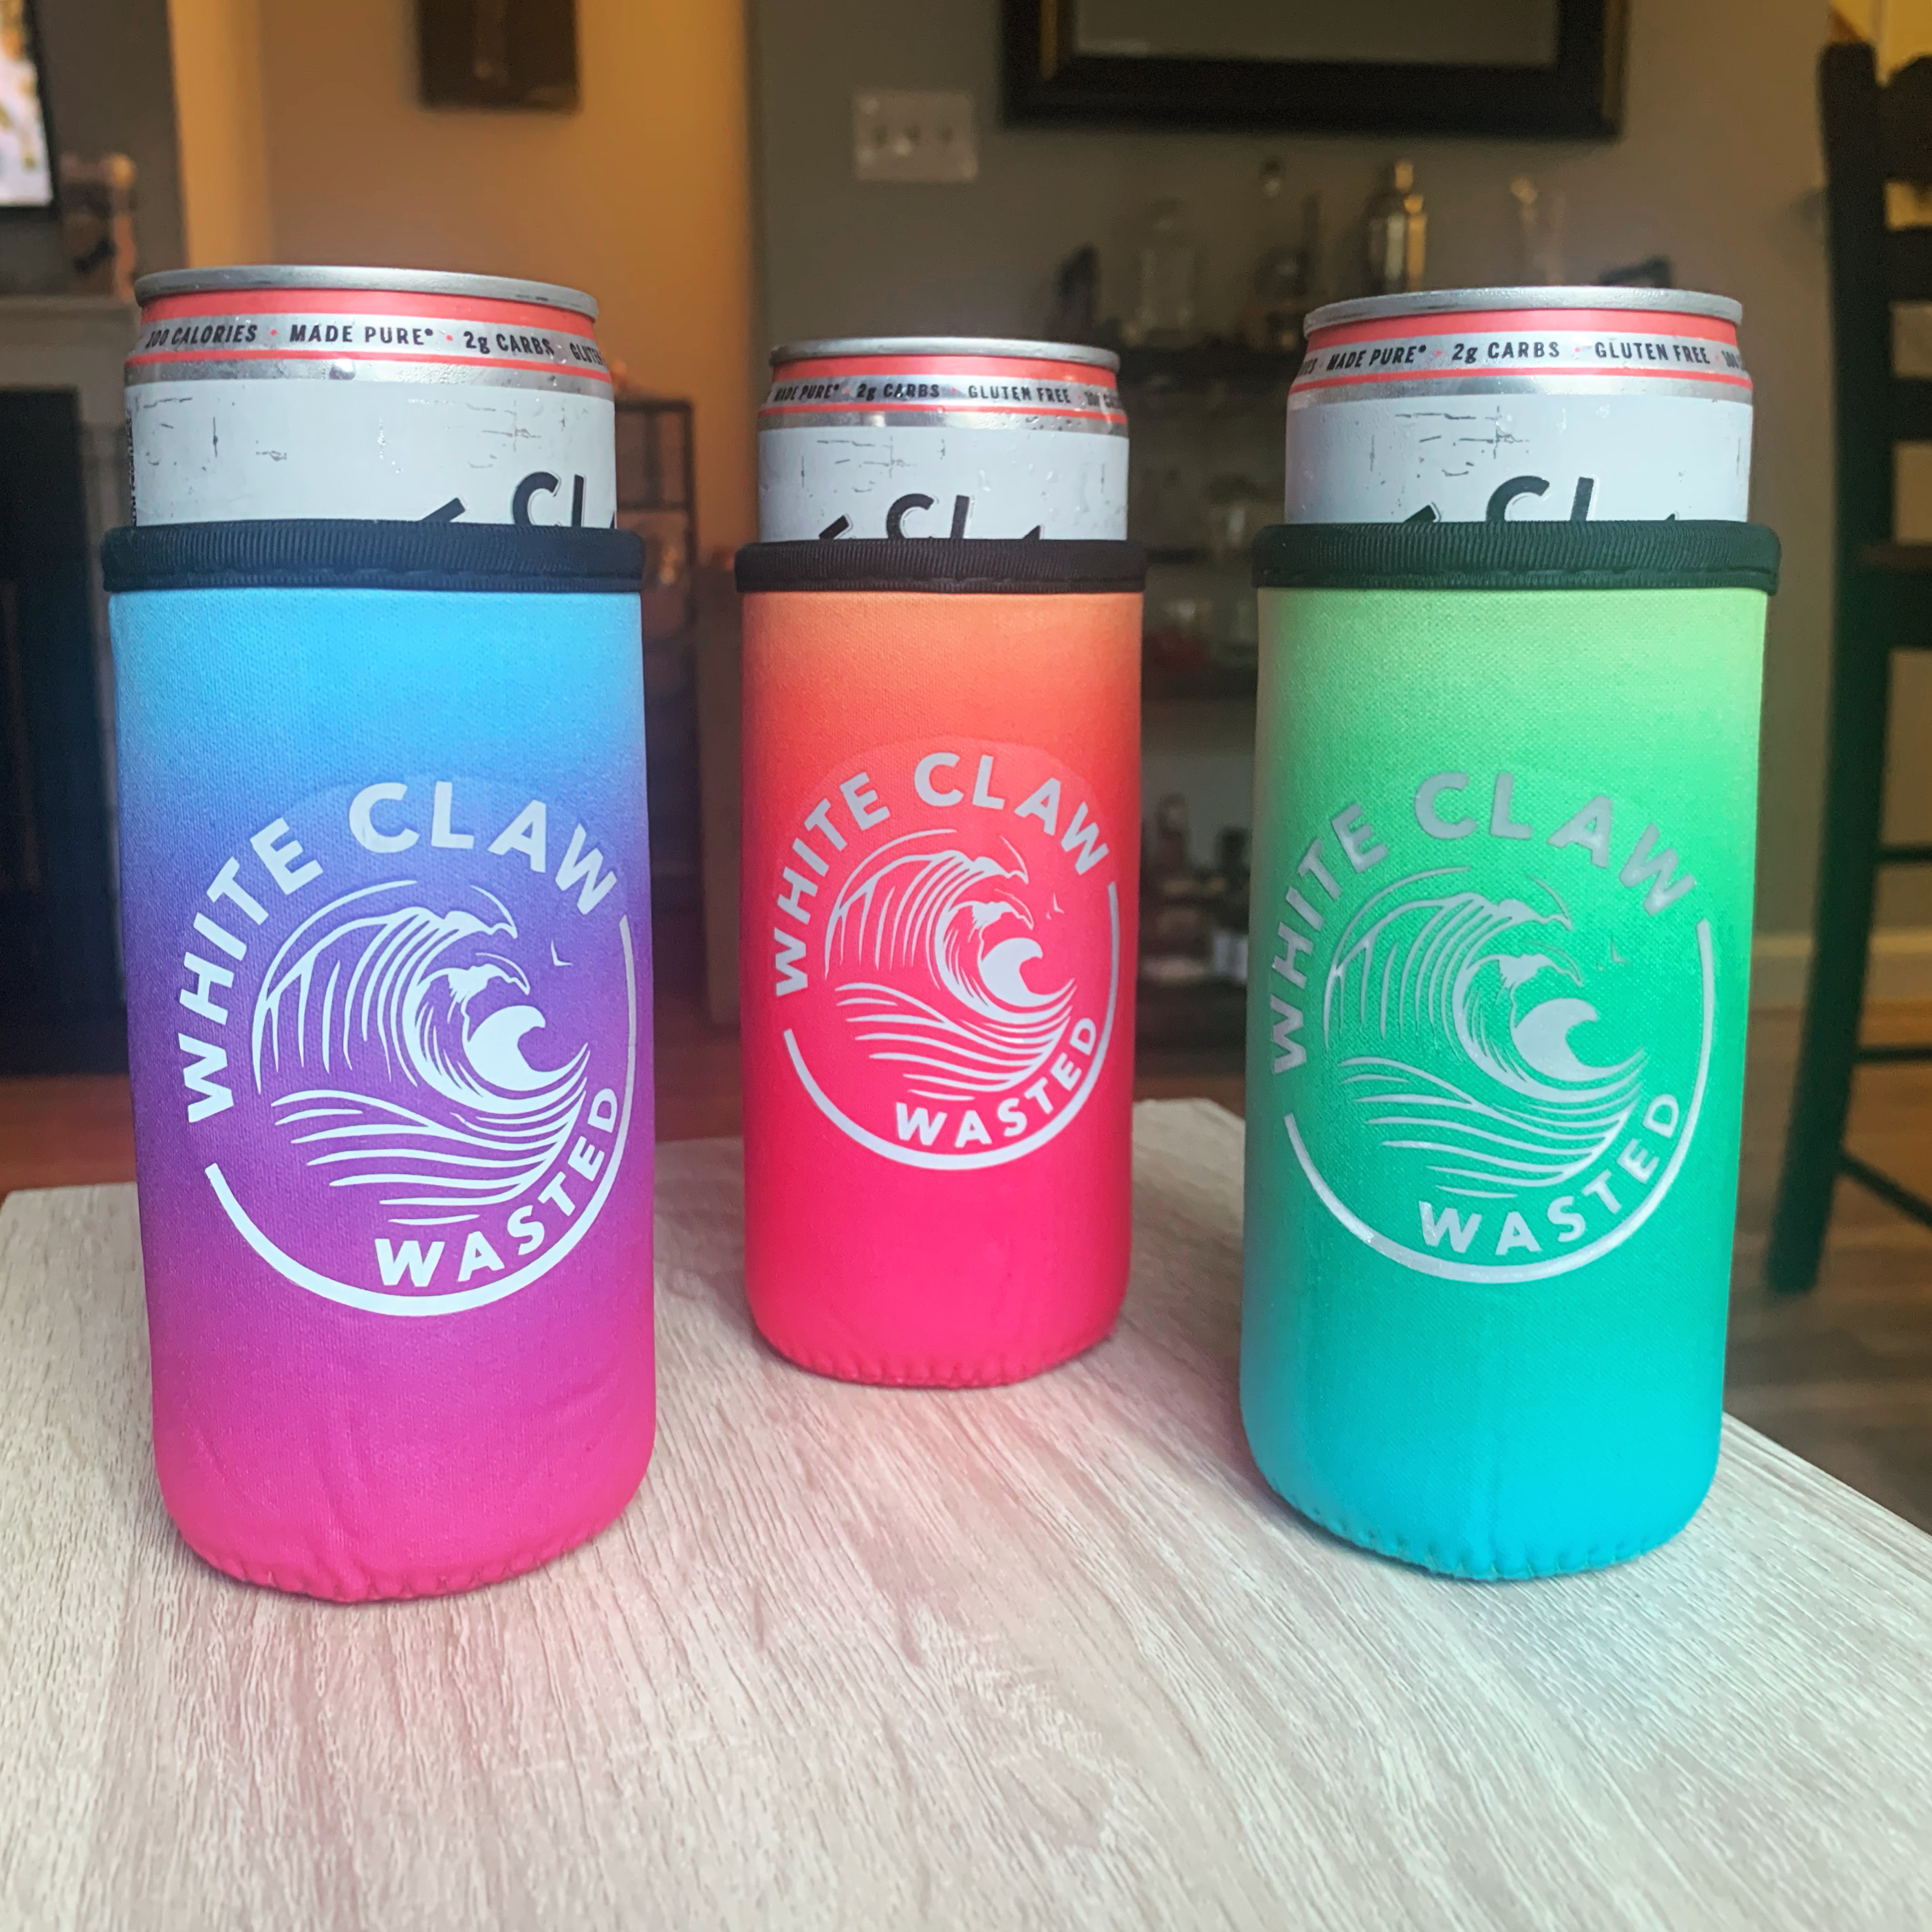 http://craftingiscontagious.com/assets/images/White-Claw-Koozies.JPG